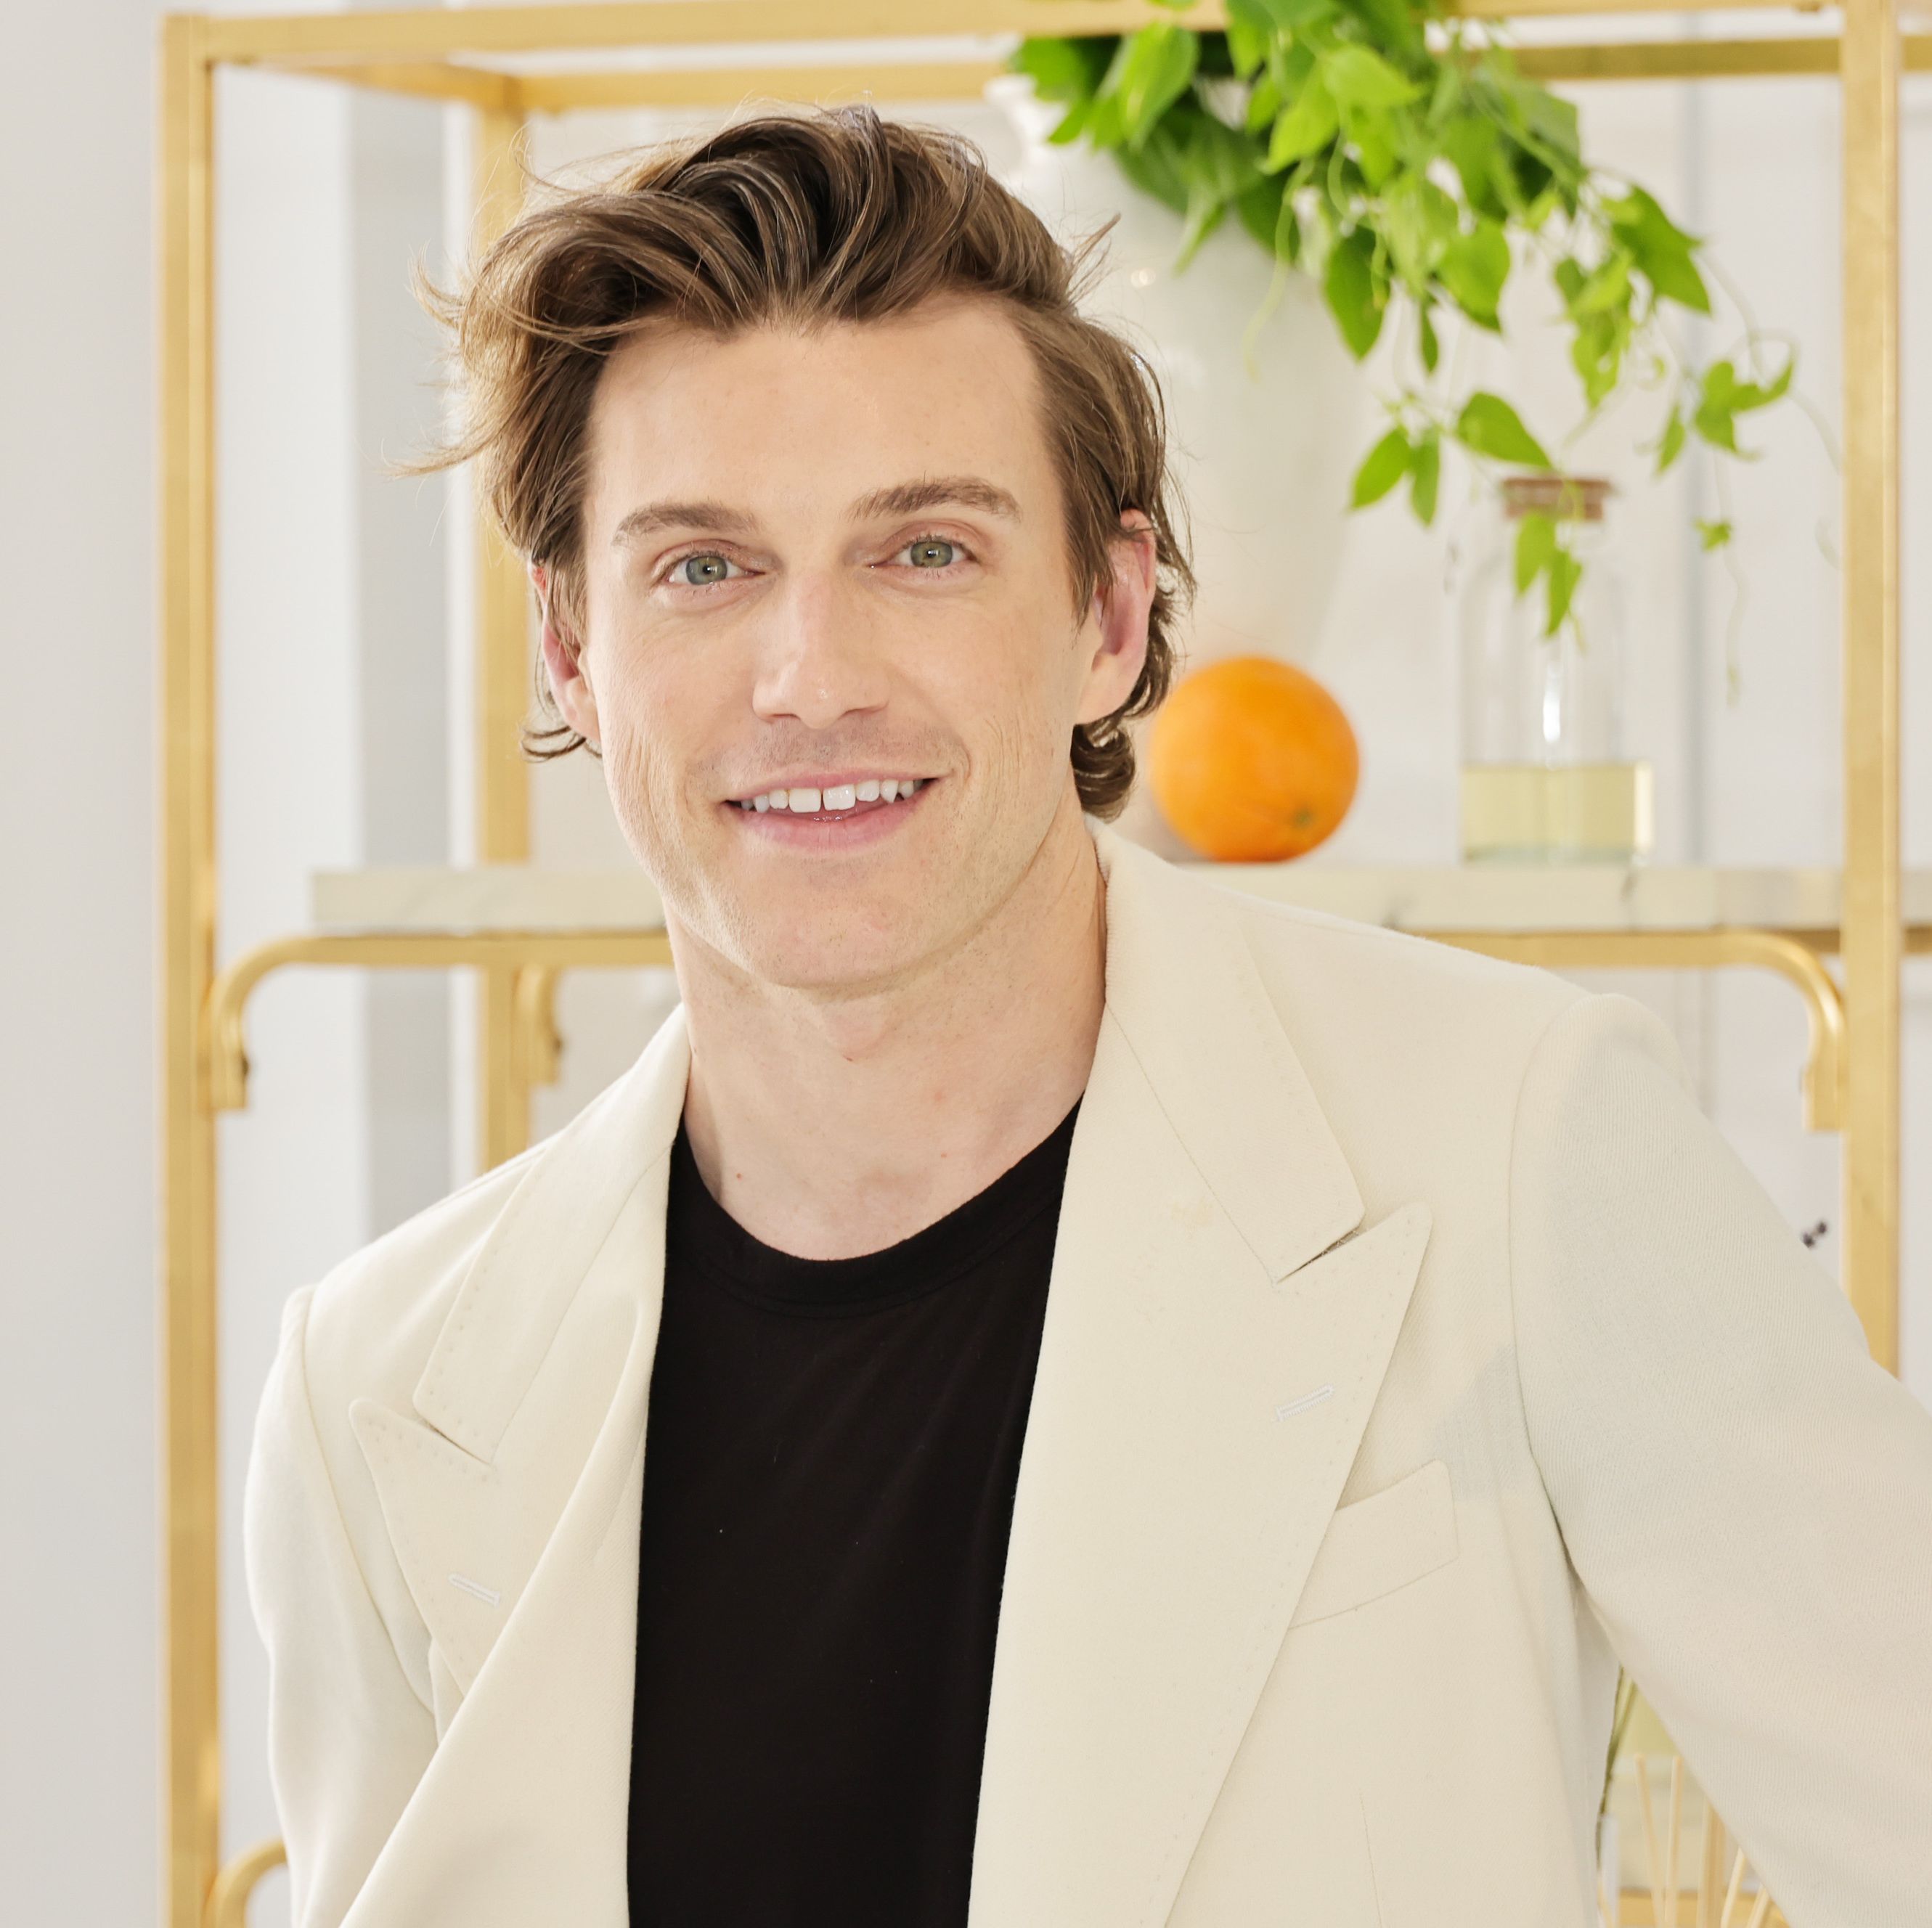 Everything You Need to Know About 'Queer Eye' Season 9 Newcomer Jeremiah Brent